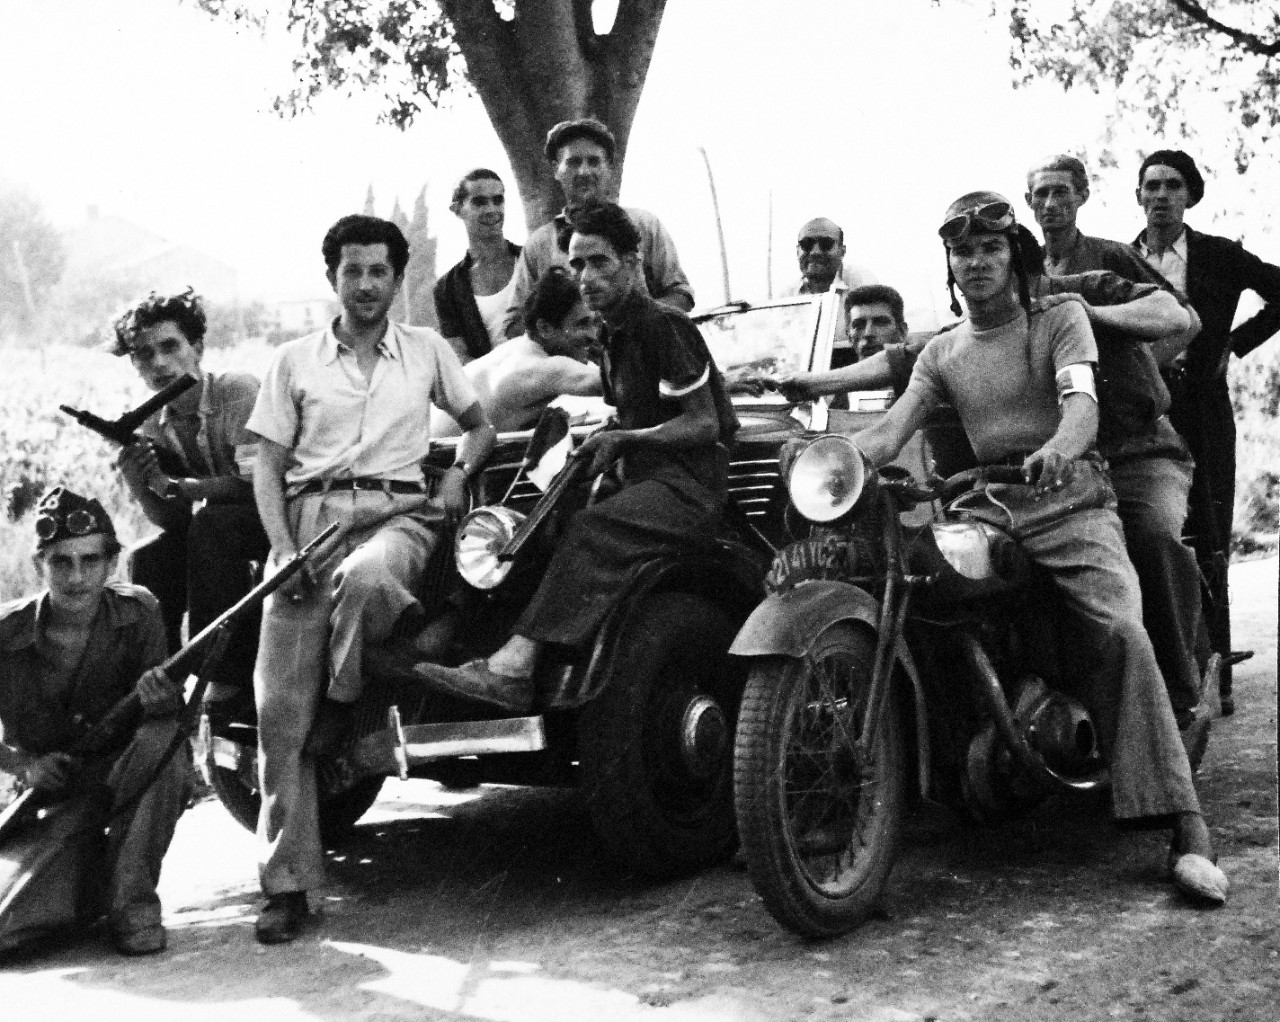 80-G-394129:   Invasion of Southern France, August 1944.   Marquis (French Underground), near Toulon, France, possibly August 1944.    Photograph released on 12 July 1948.  (9/16/2014).  